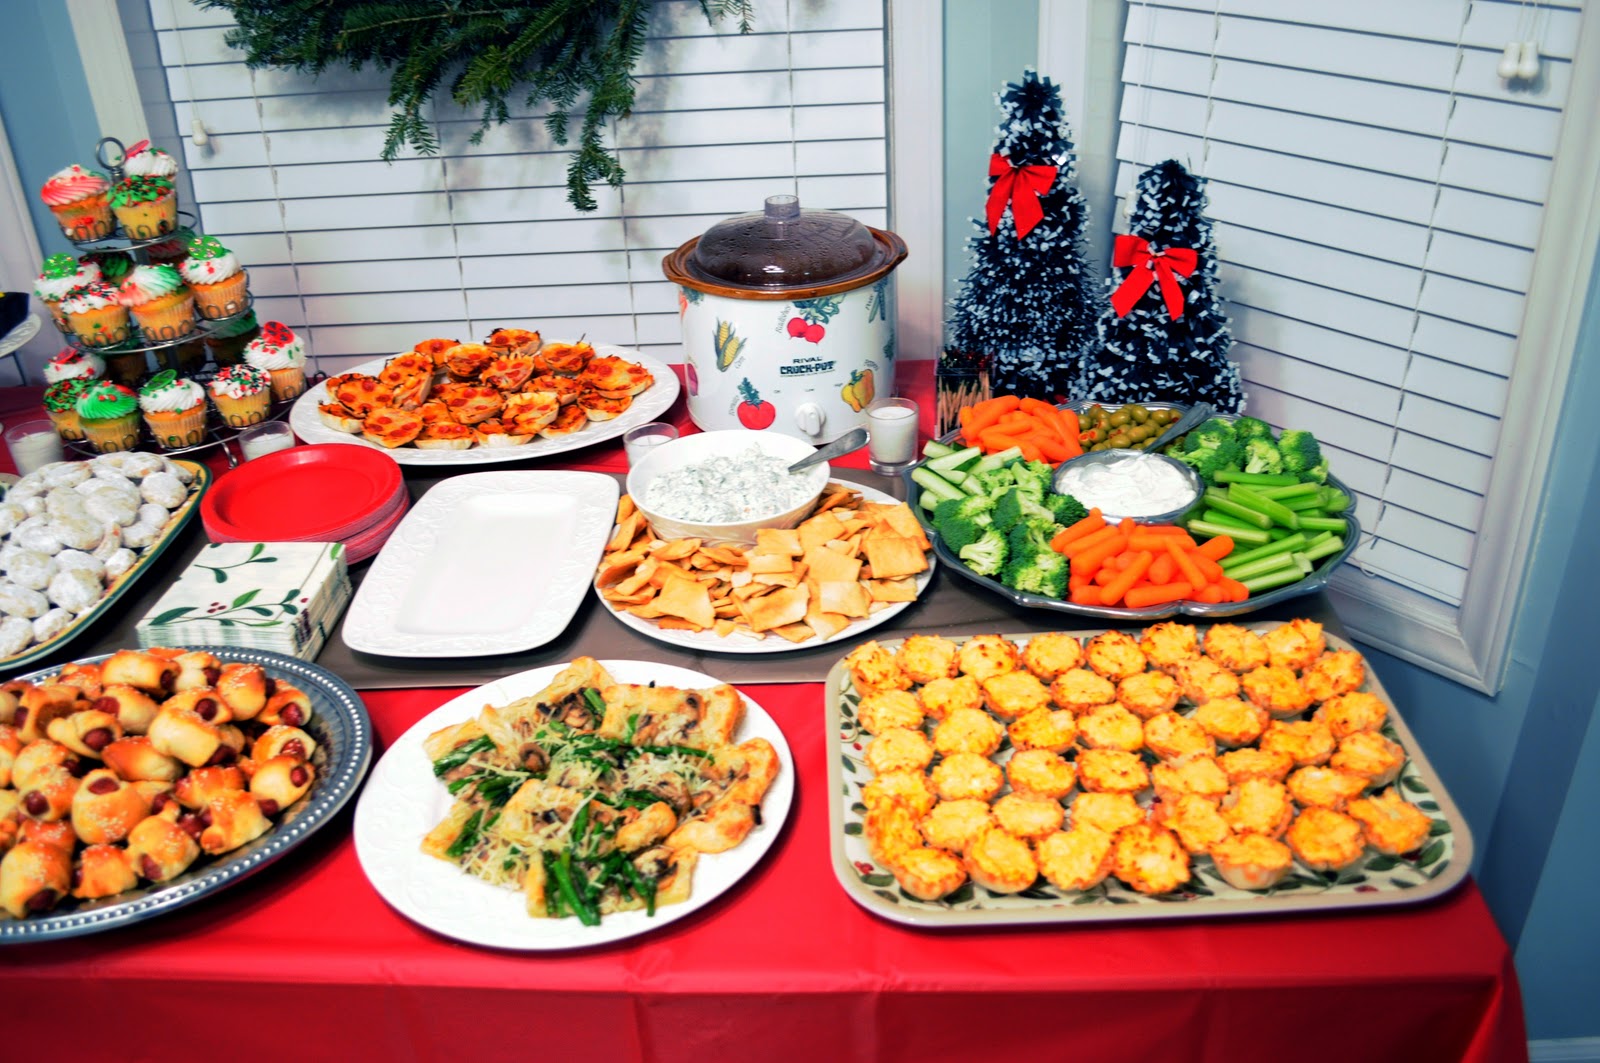 70 Best Christmas Party Food Ideas And Recipes 2021